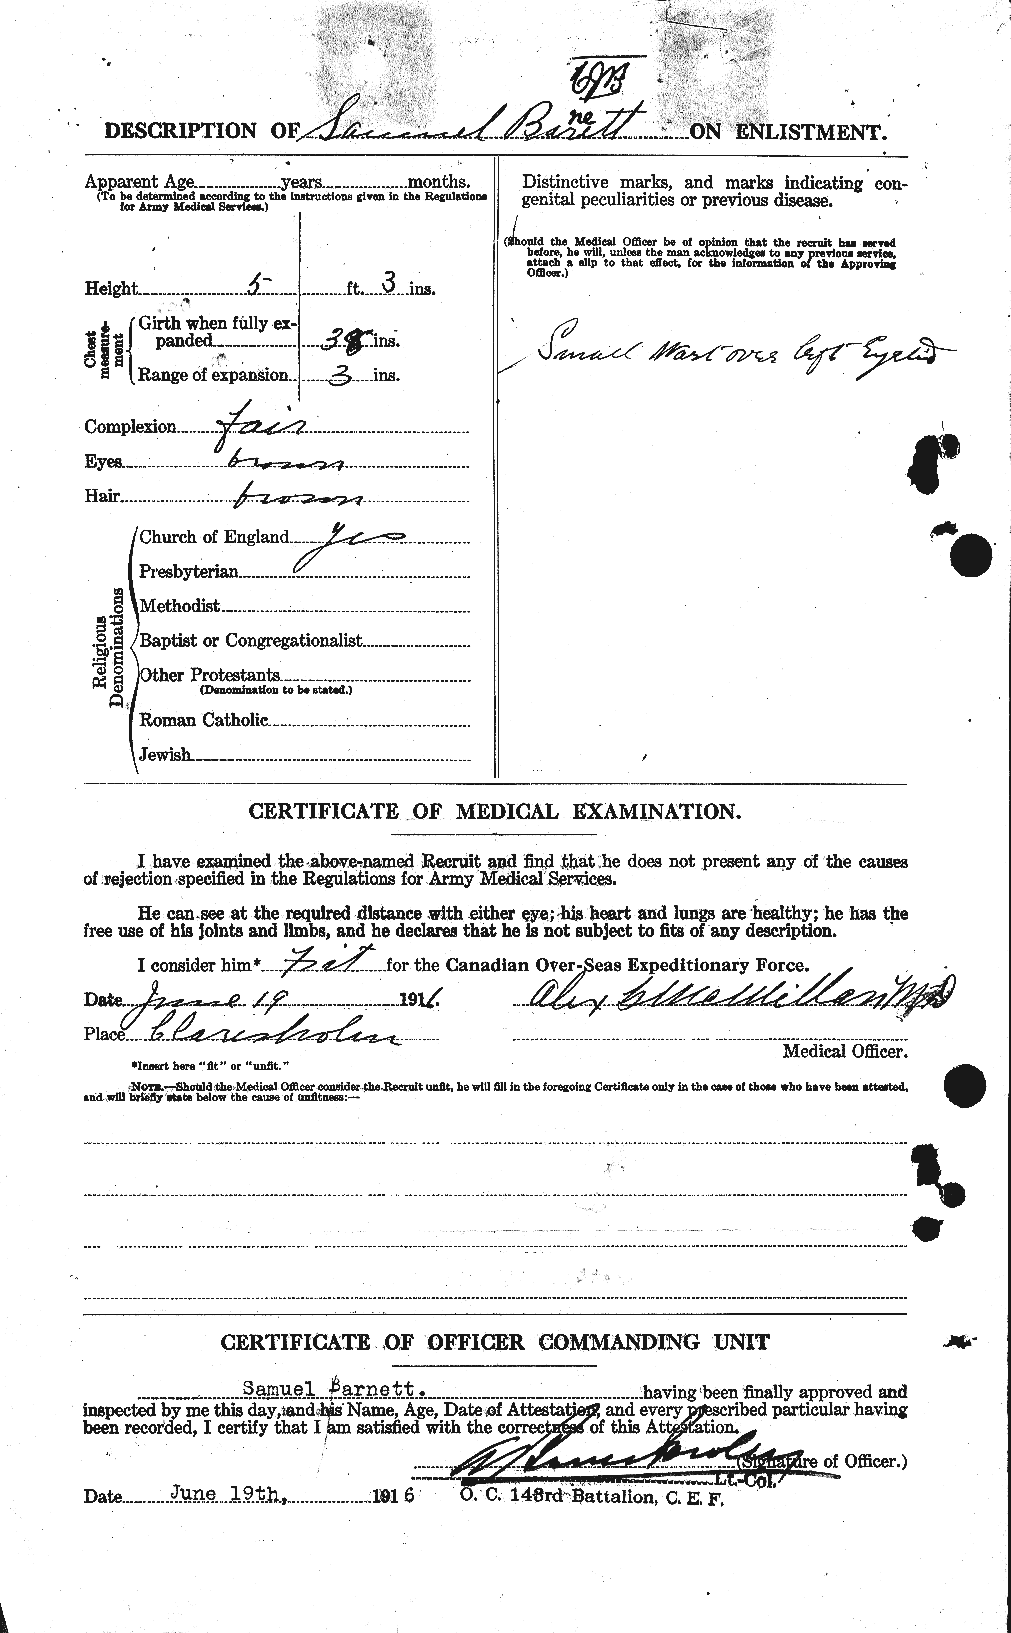 Personnel Records of the First World War - CEF 222892b